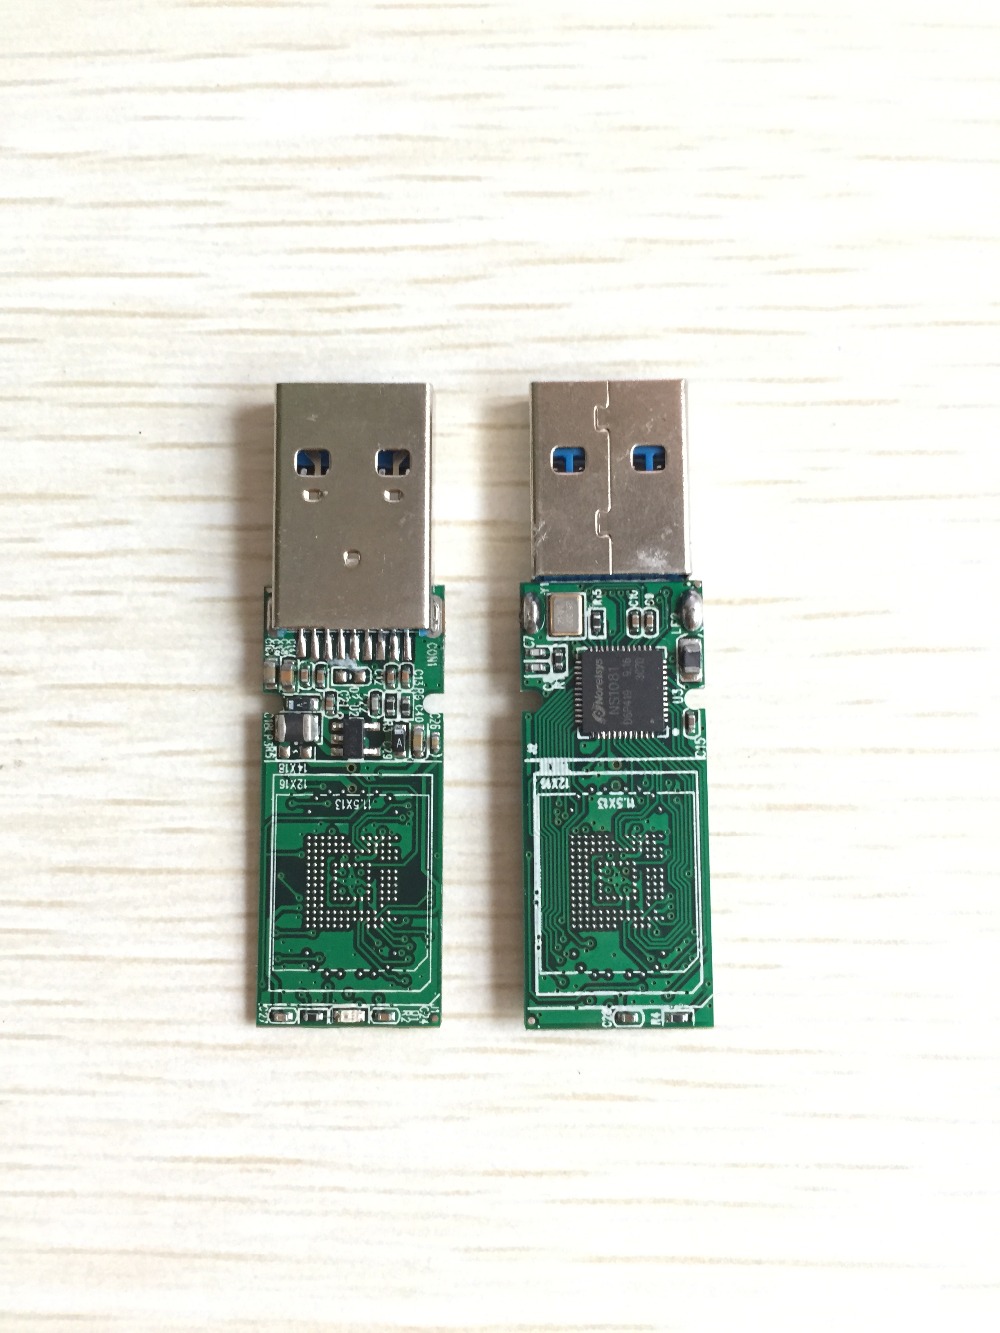 Usb30 Emmc 153 169 U Disk Pcb Ns1081 Main Controller Without Flash Memory For Recycle Emmc Emcp 7390